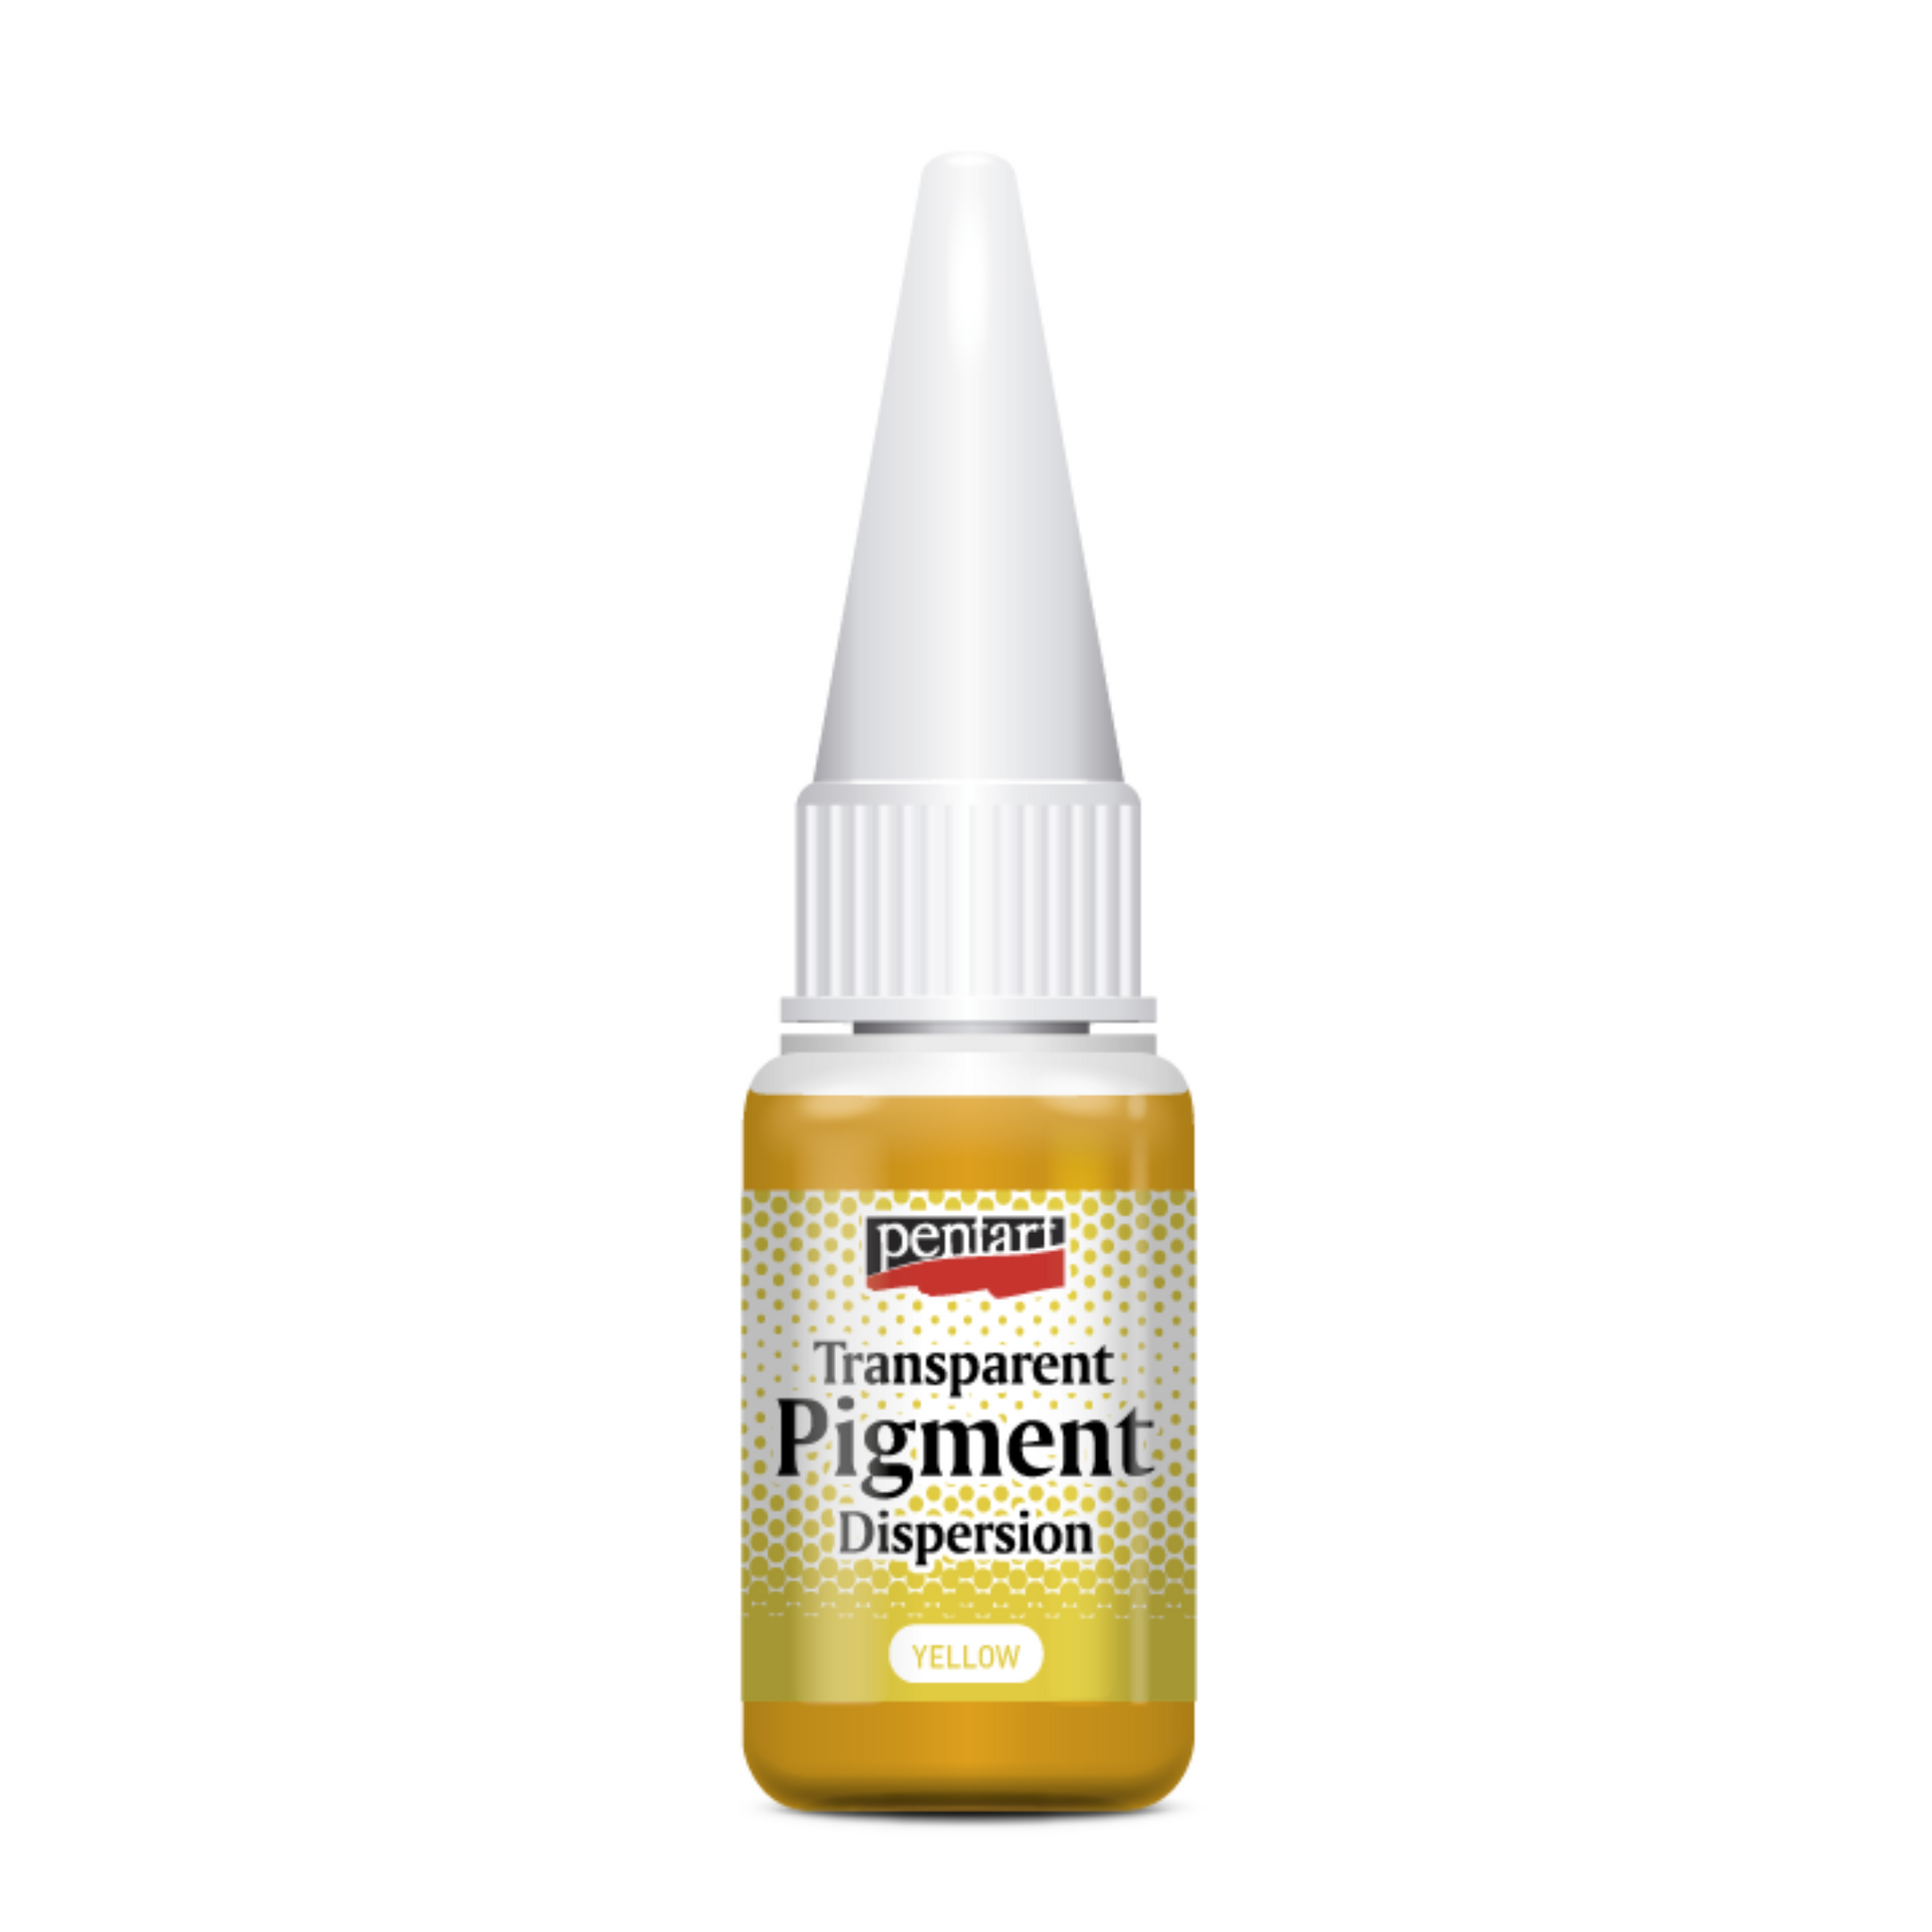 Transparent Pigment Dispersion in Yellow by Pentart available at Milton's Daughter.